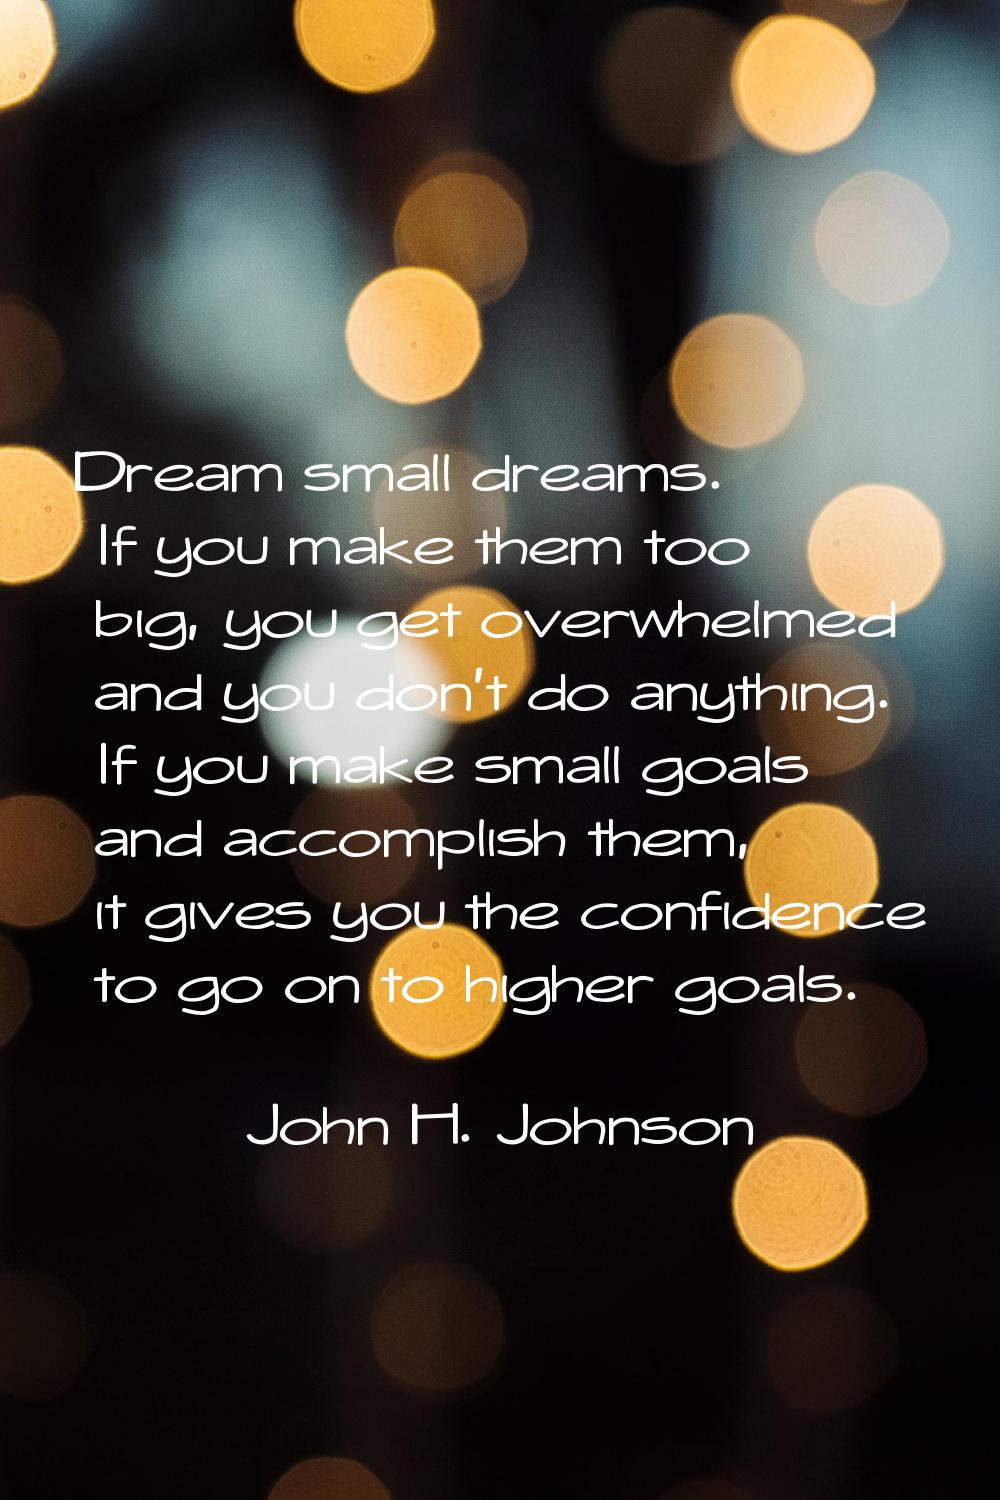 Dream small dreams. If you make them too big, you get overwhelmed and you don't do anything. If you